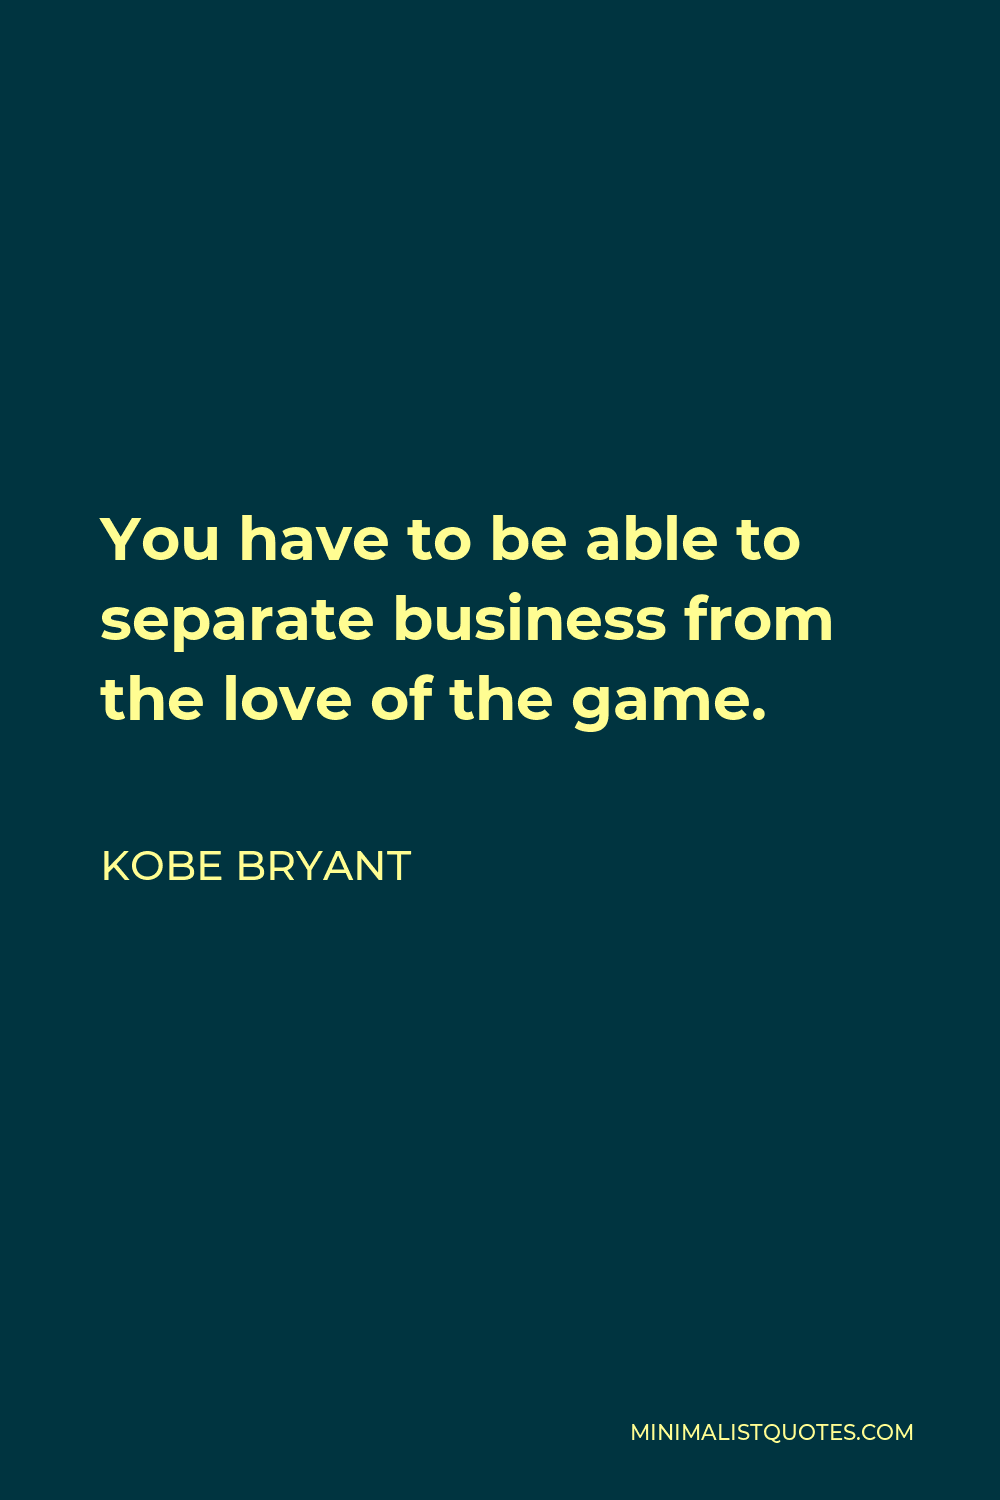 Kobe Bryant Quote - You have to be able to separate business from the love of the game.